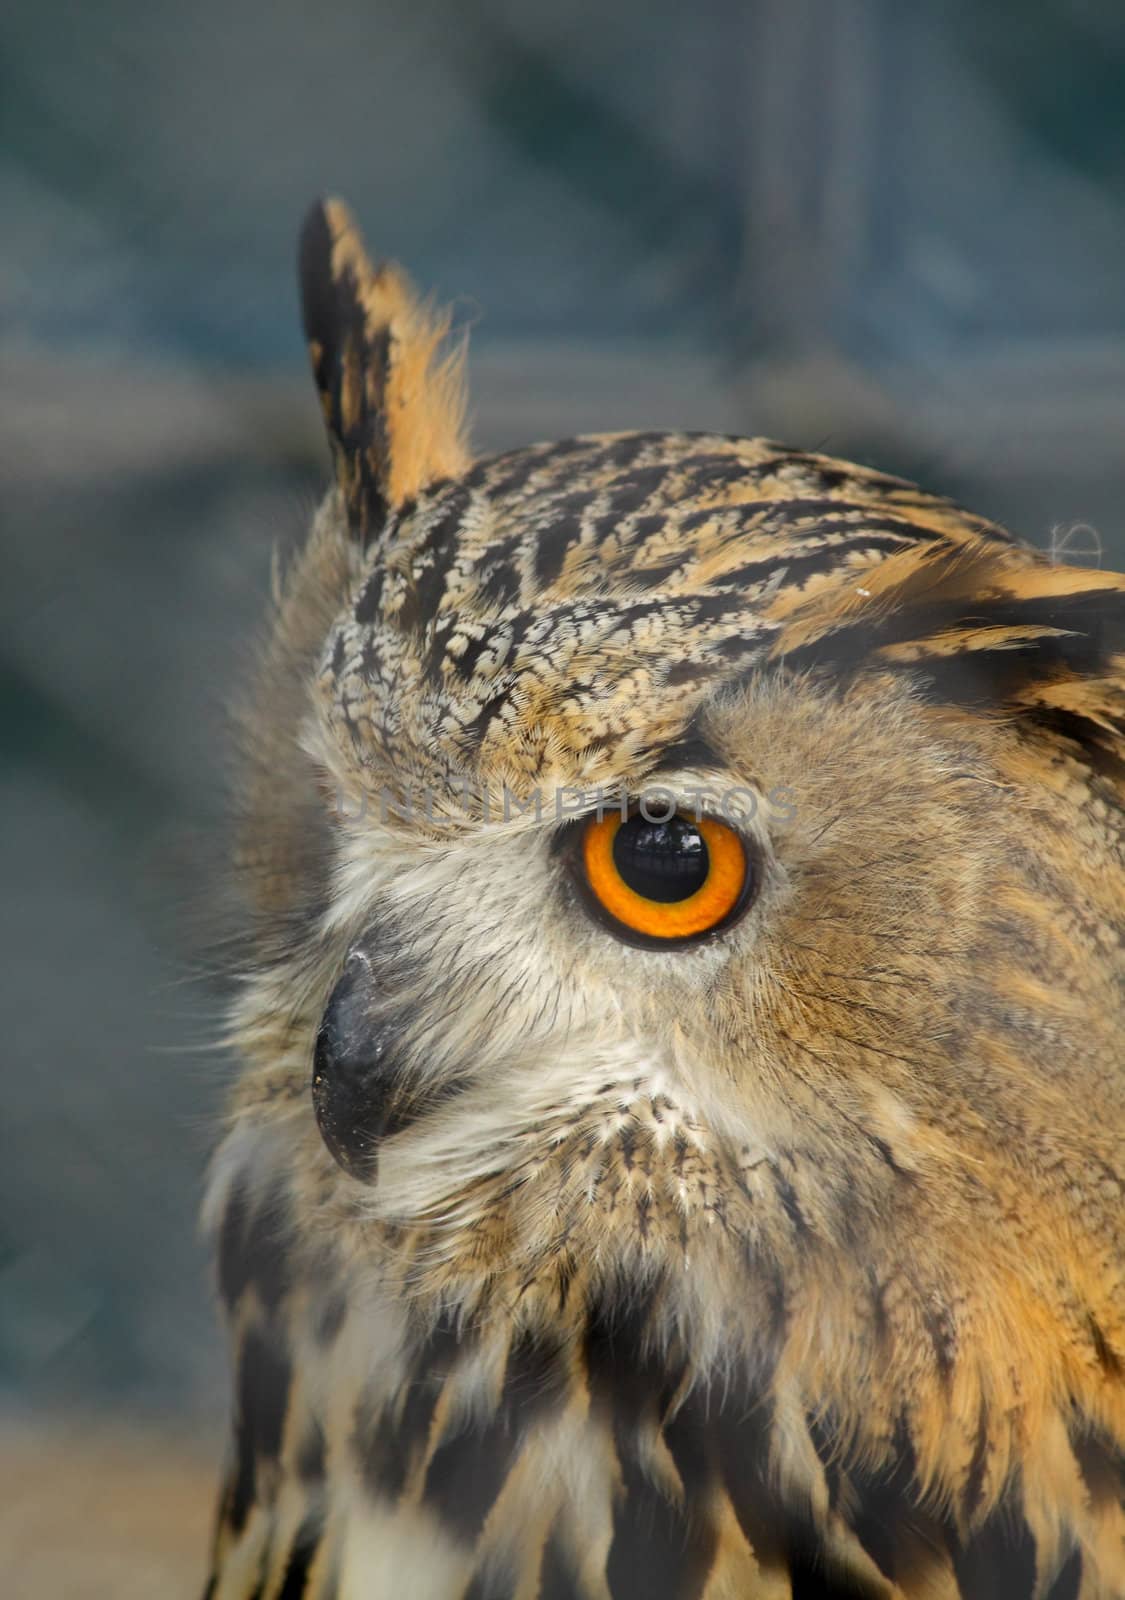 Close up of the owl's head.